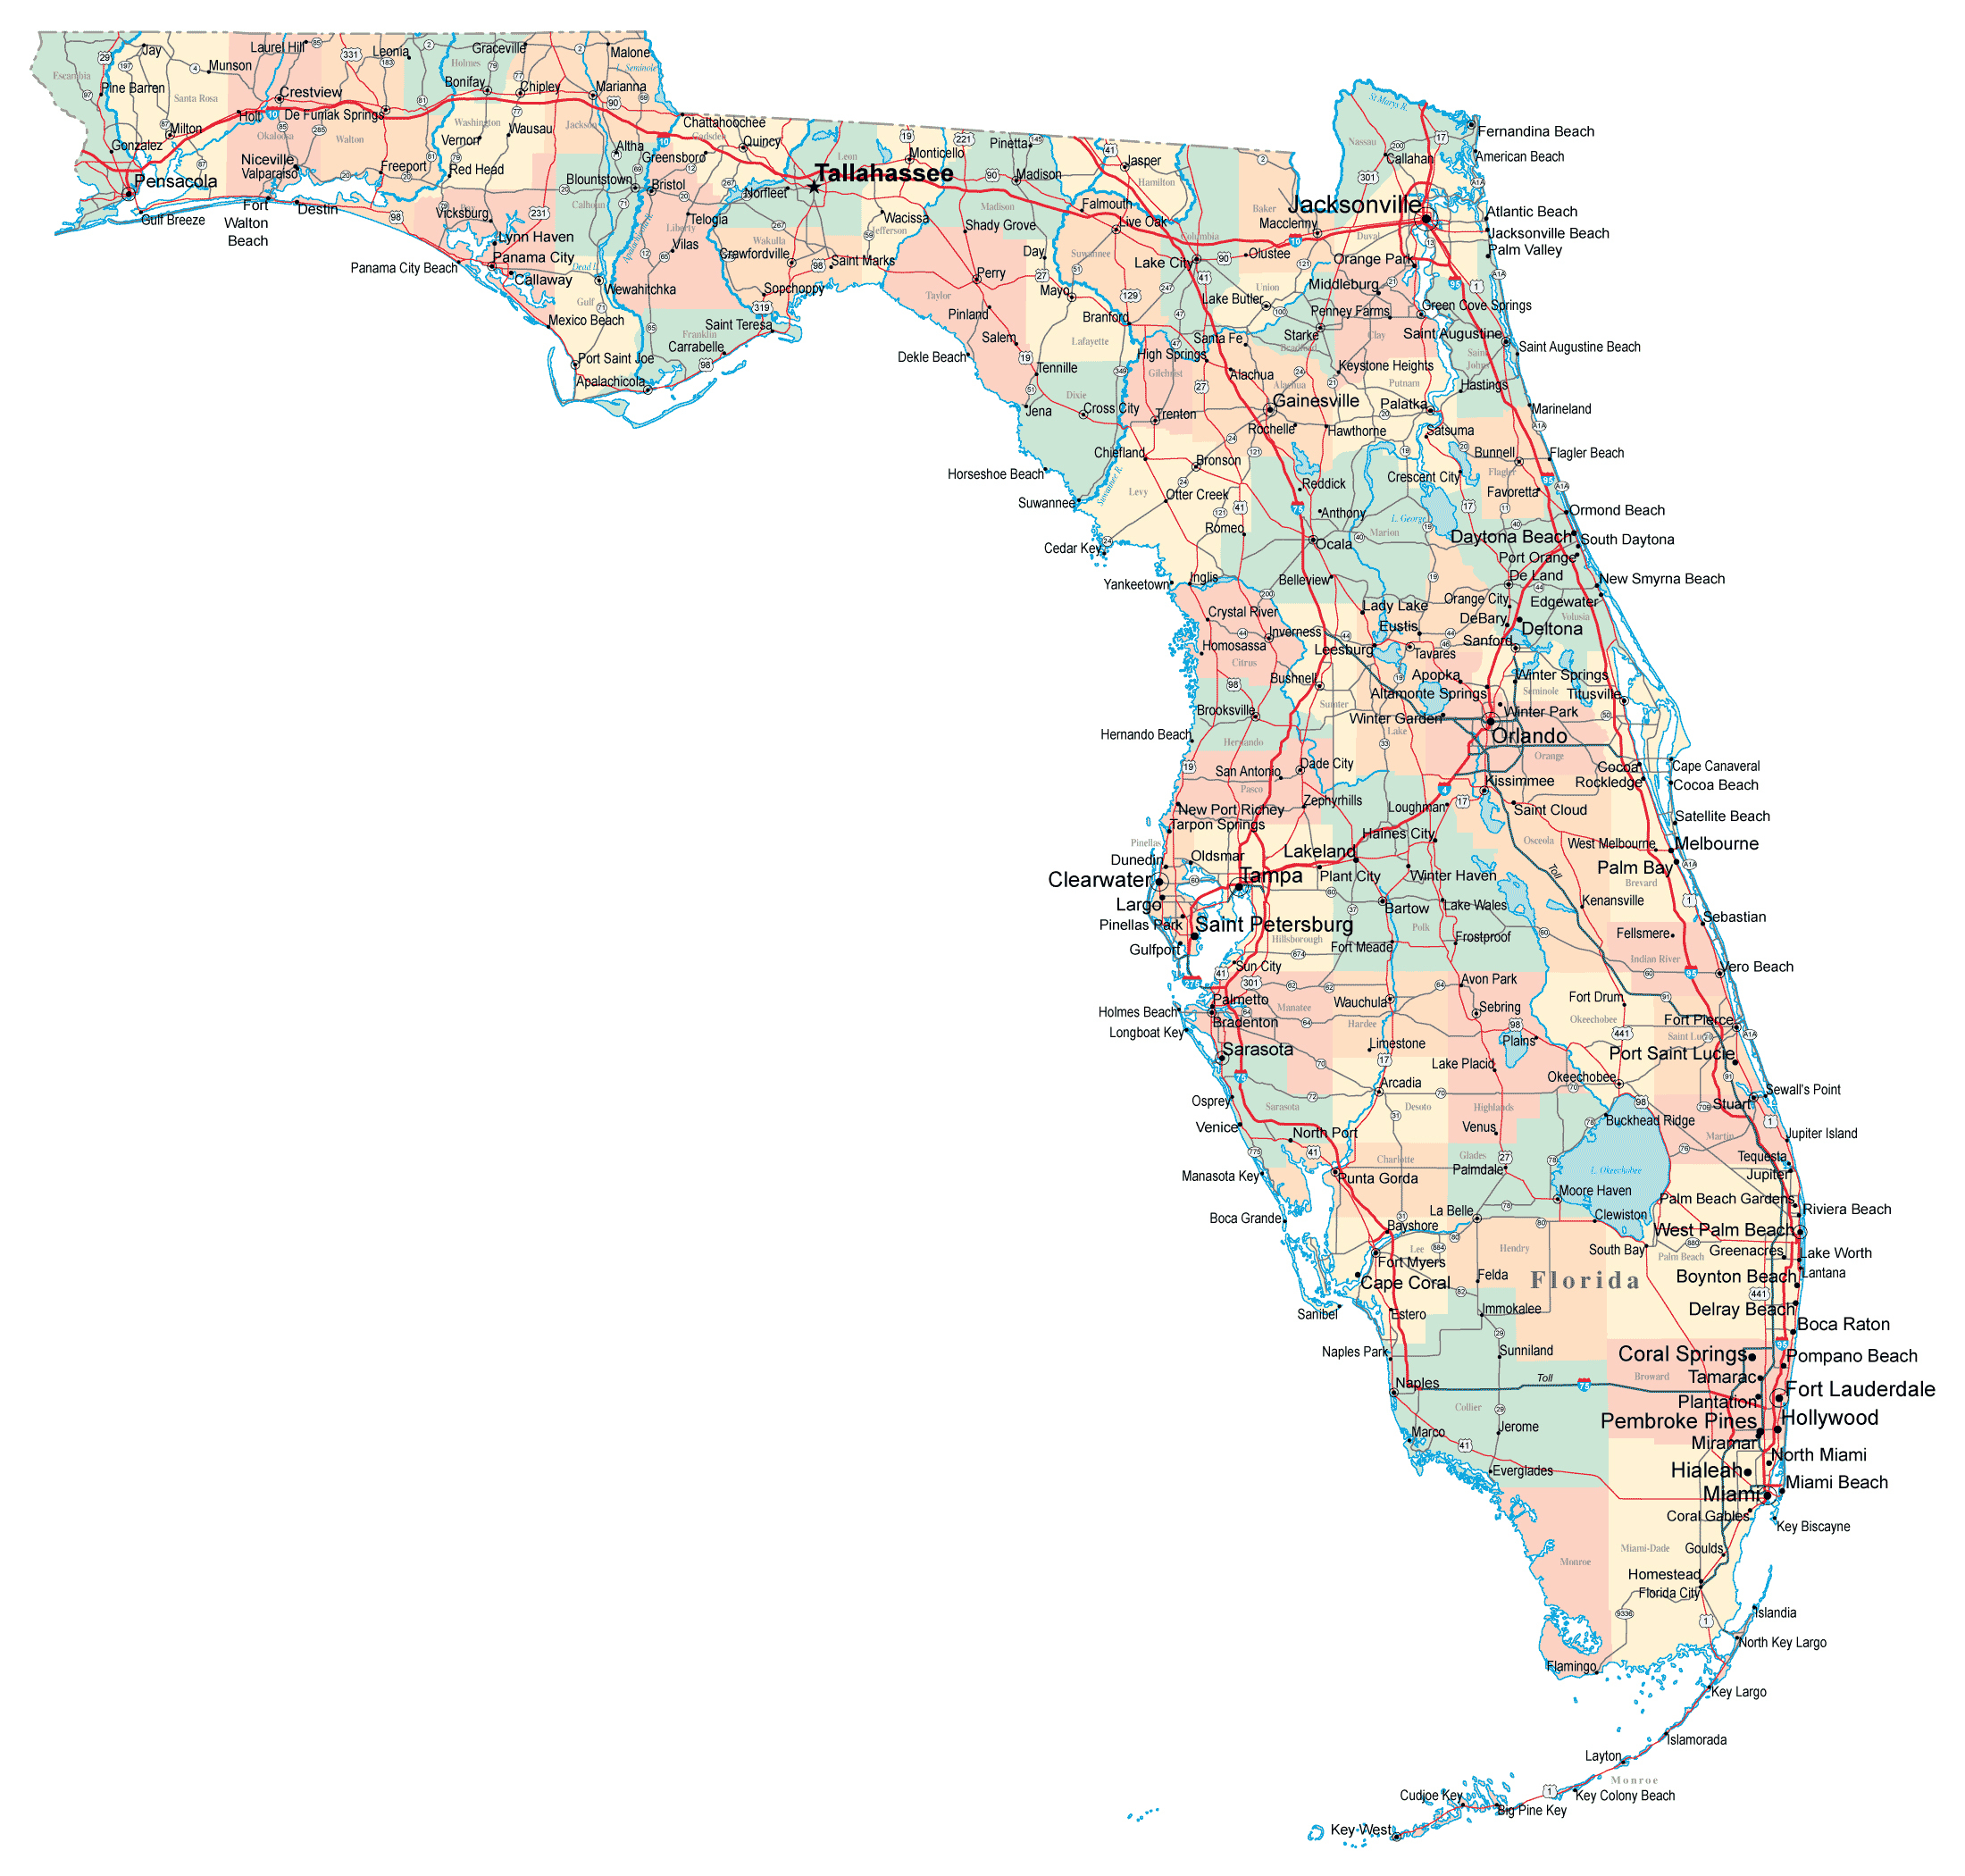 Large Administrative Map Of Florida With Roads And Cities | Vidiani - Large Map Of Florida